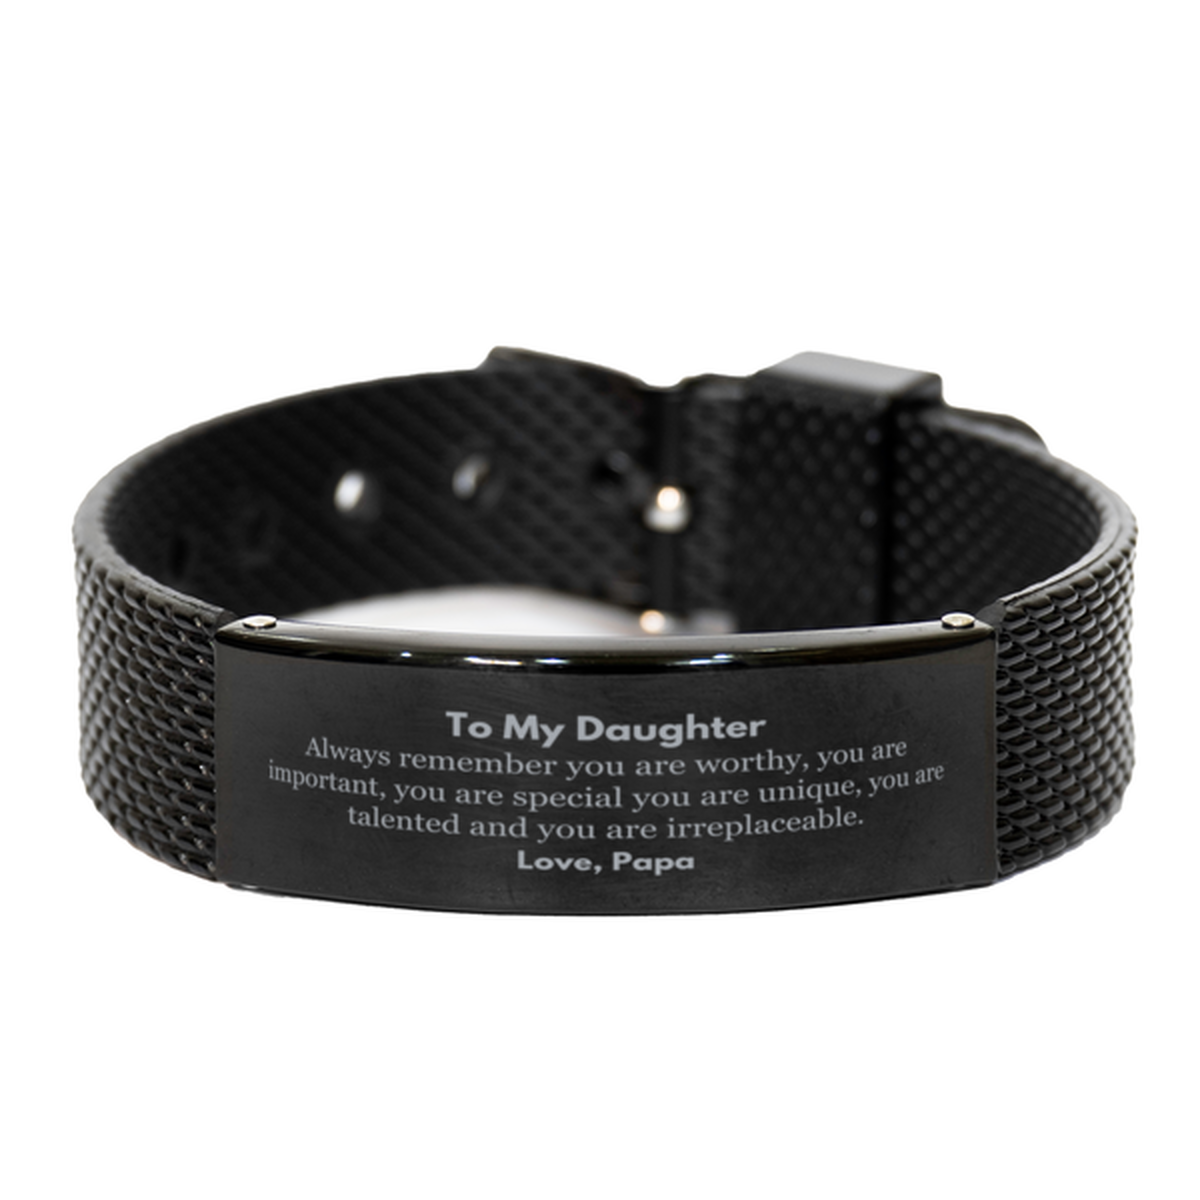 Daughter Birthday Gifts from Papa, Inspirational Black Shark Mesh Bracelet for Daughter Christmas Graduation Gifts for Daughter Always remember you are worthy, you are important. Love, Papa